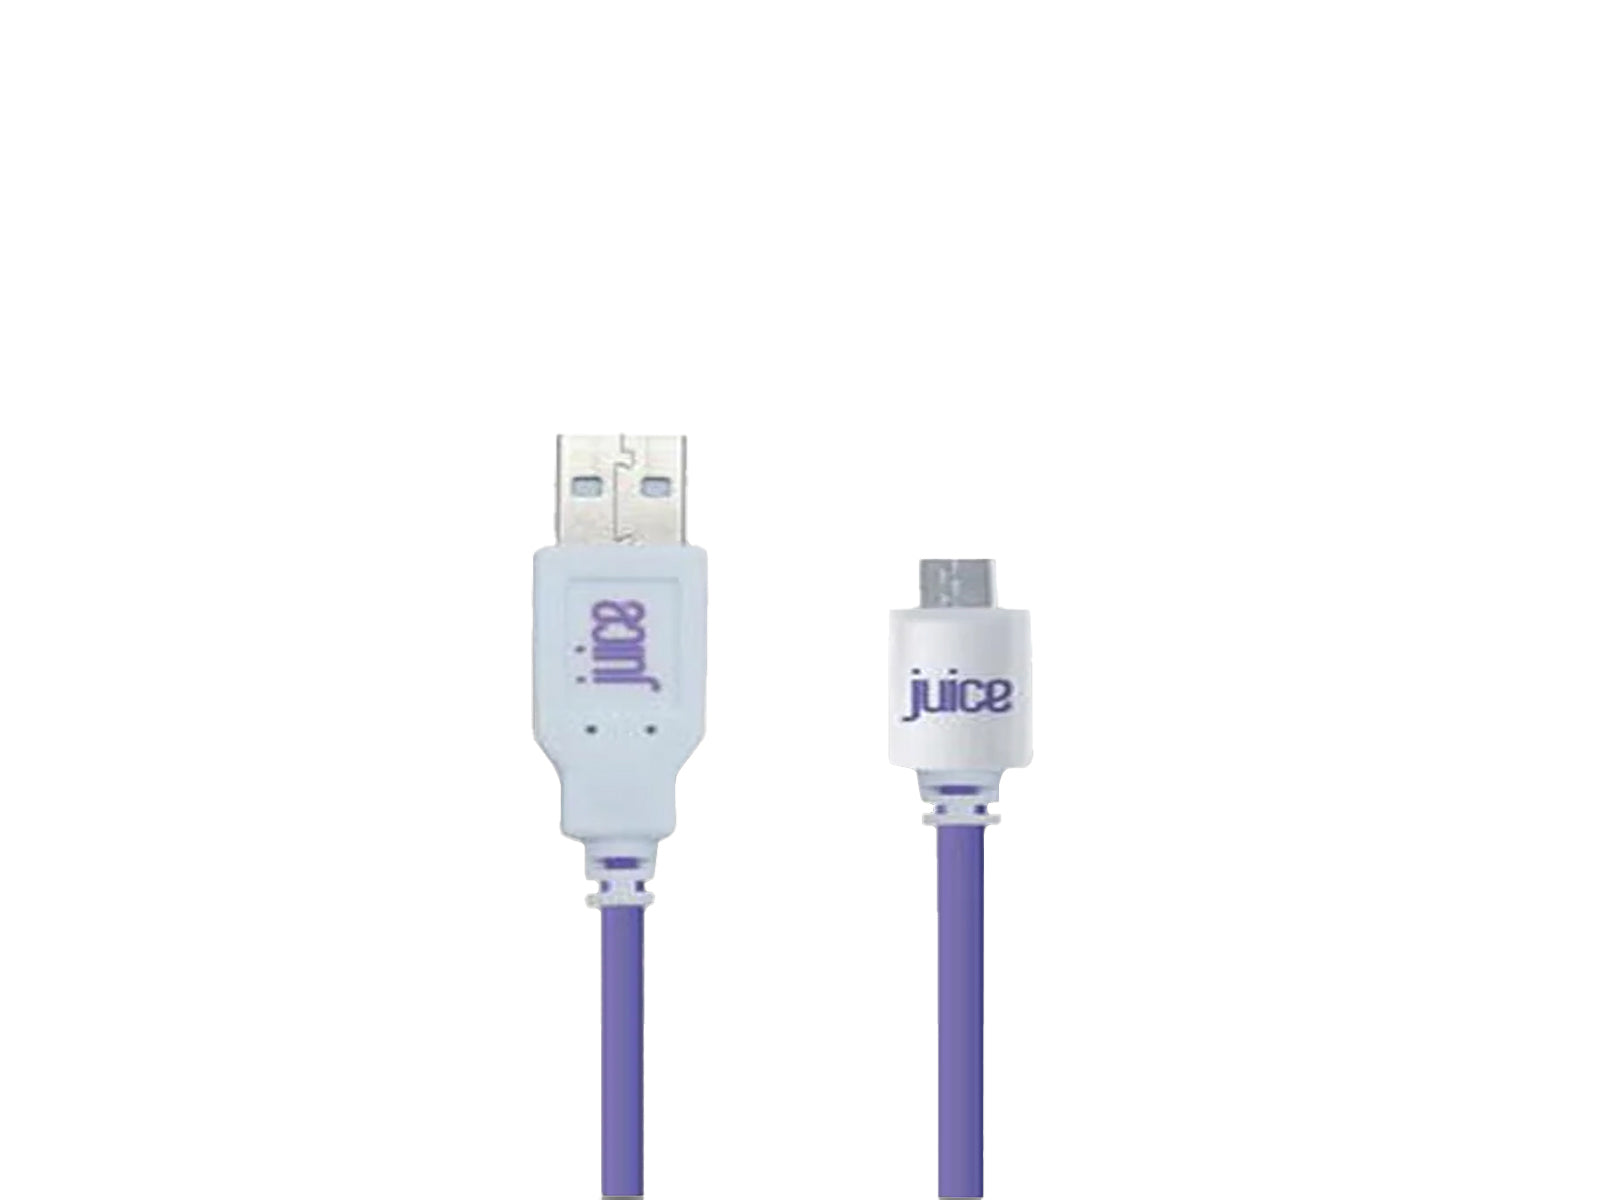 Image shows close up view of connectors on white background